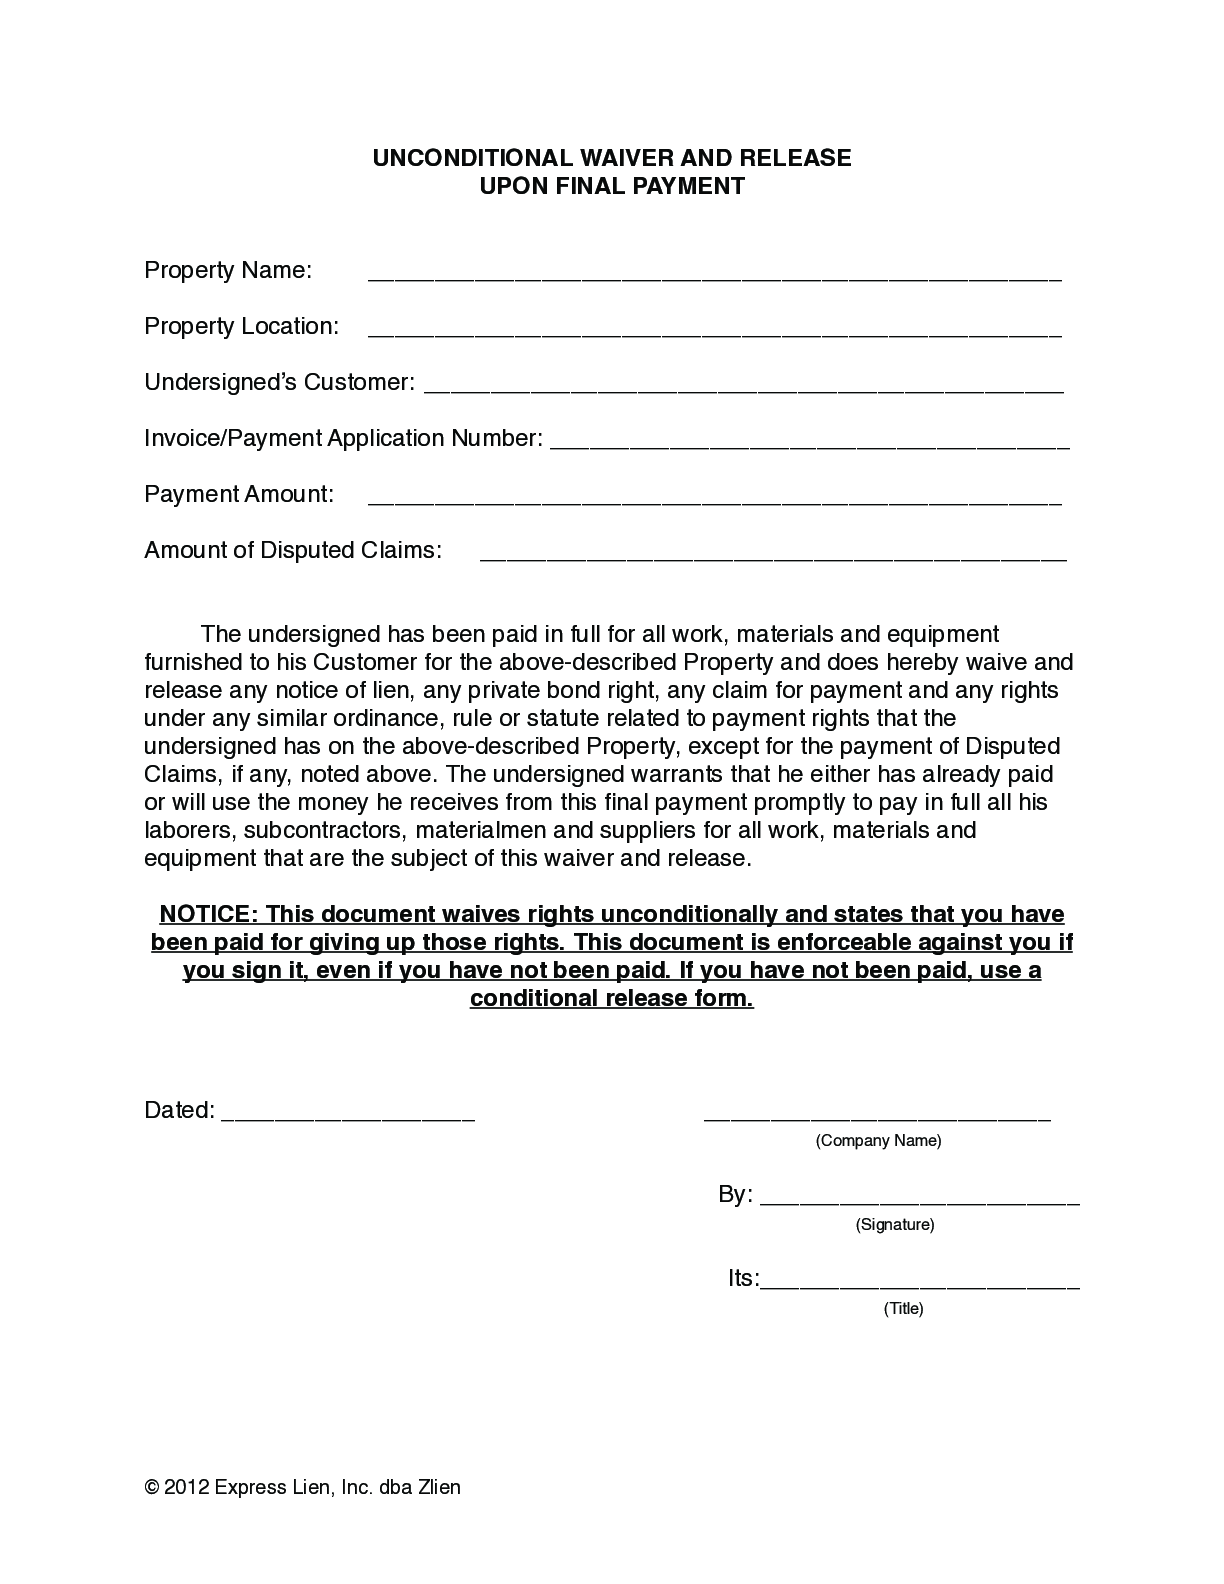 Nevada Final Unconditional Lien Waiver Form - free from